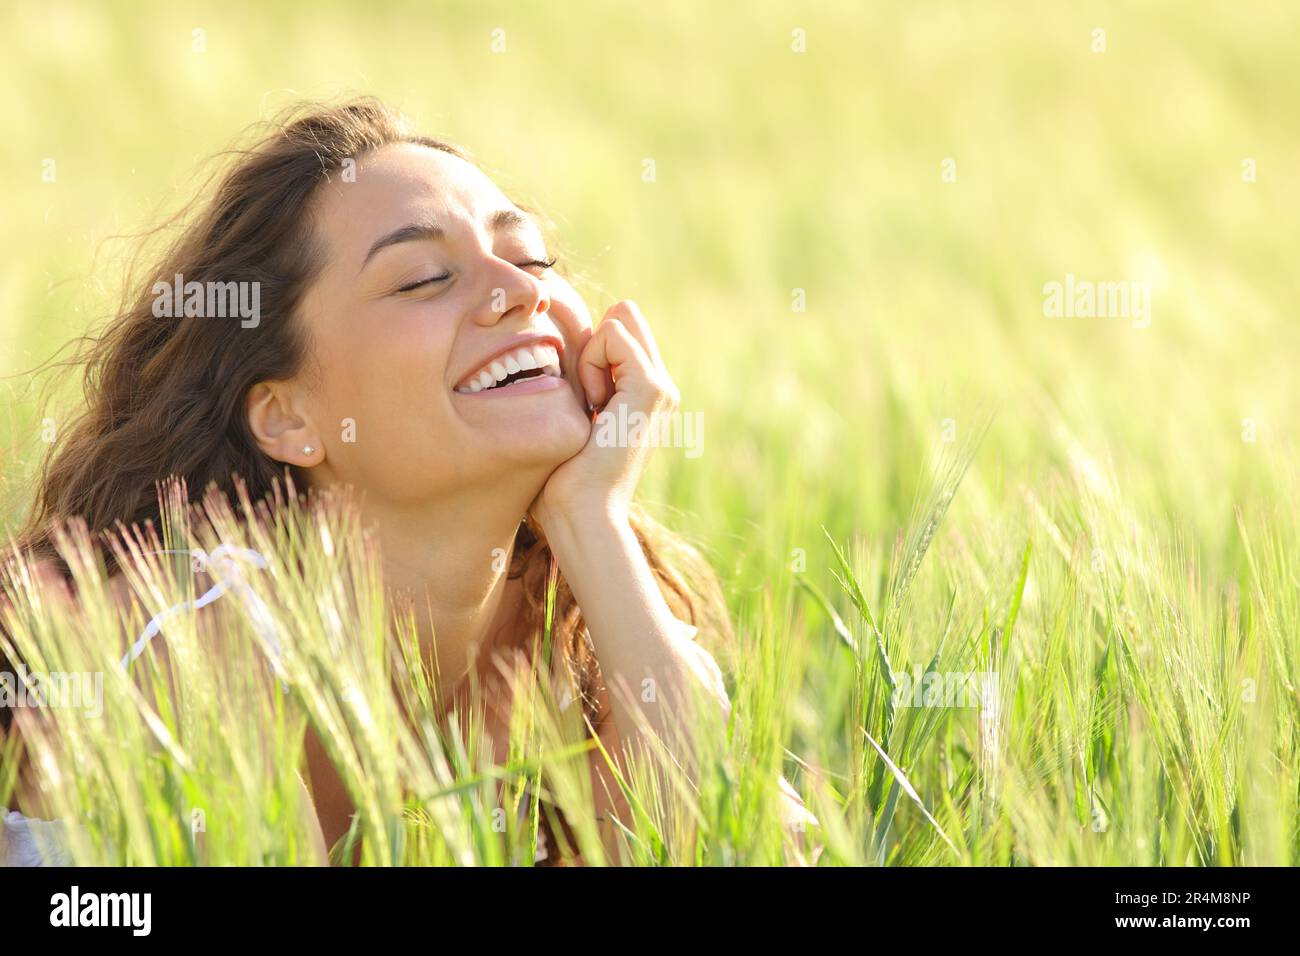 Funny woman enjoying of nature laughing in a field Stock Photo